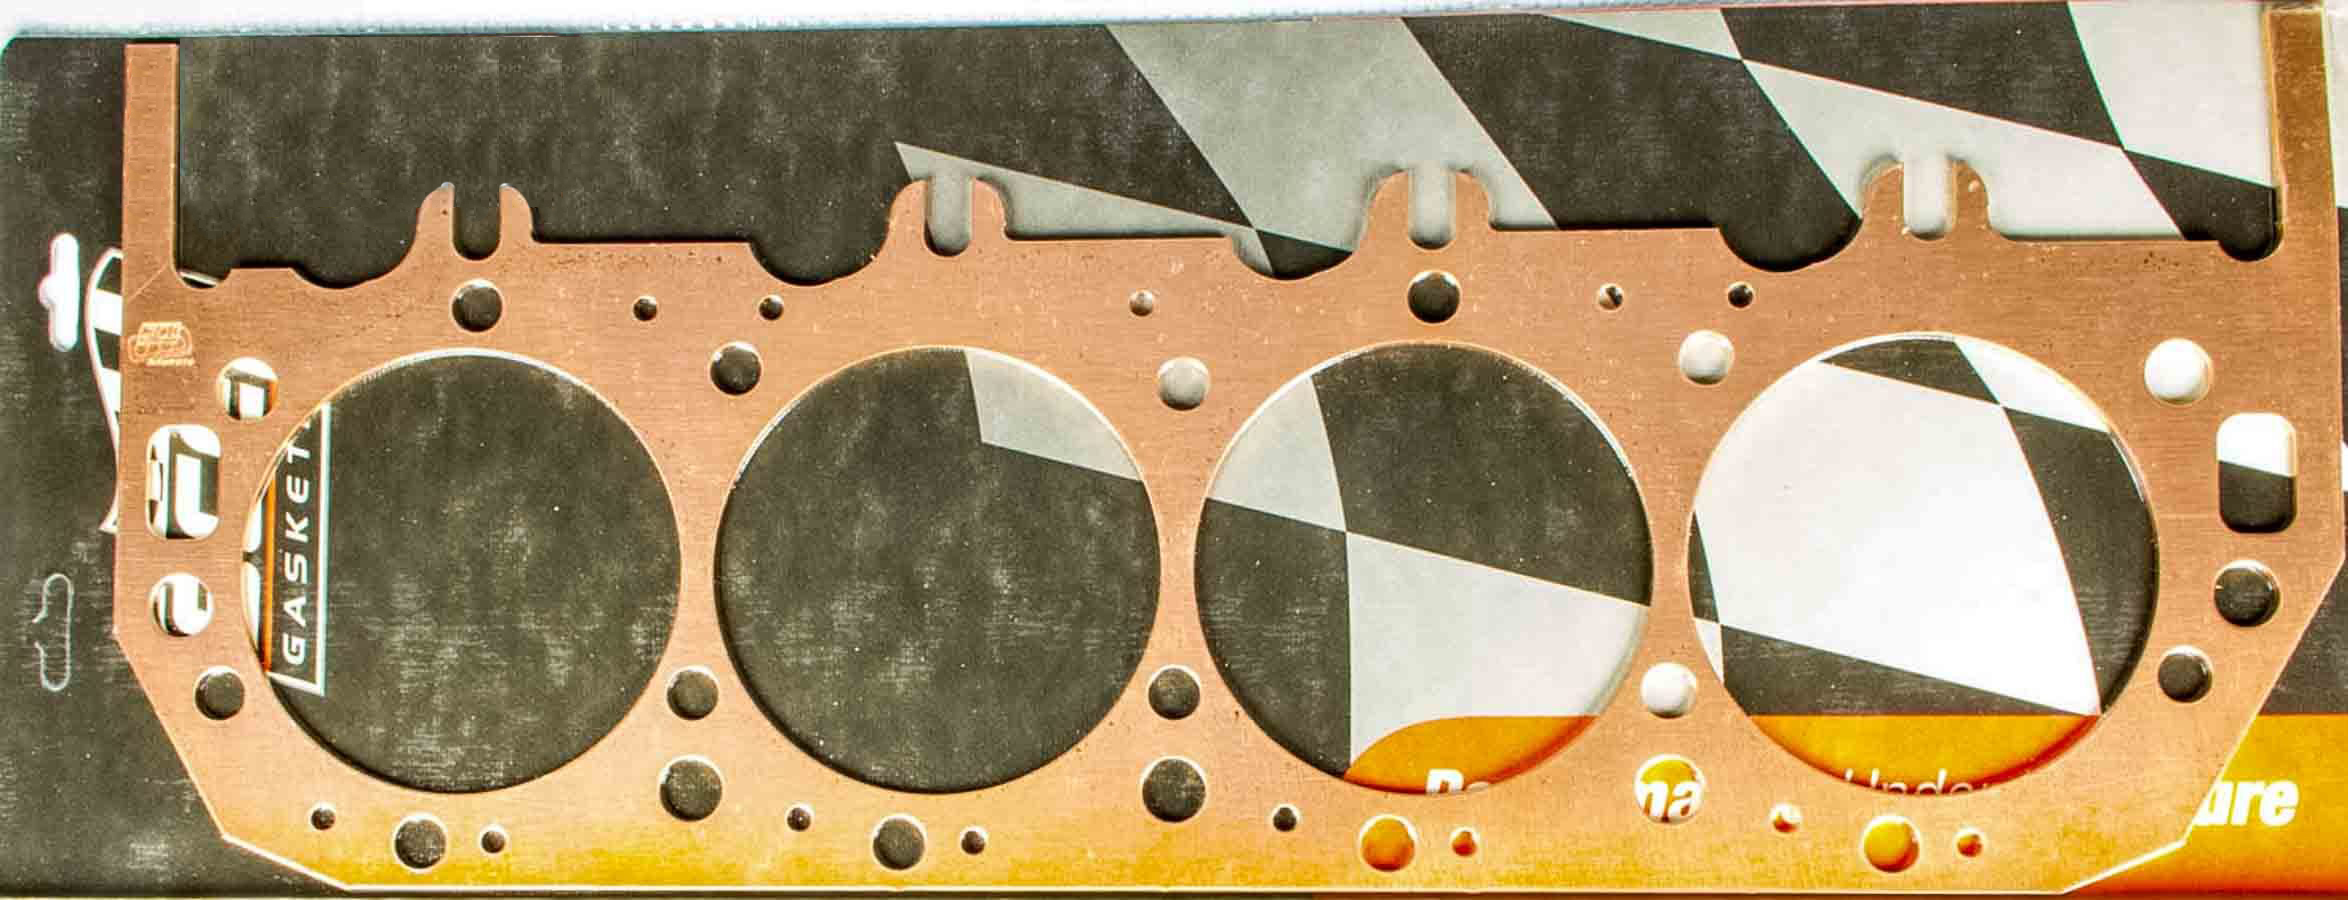 SCE Gaskets Cylinder Head Gasket, Pro Copper, 4.570 in Bore, 0.050 in Compression Thickness, Copper, Big Block Chevy, Each